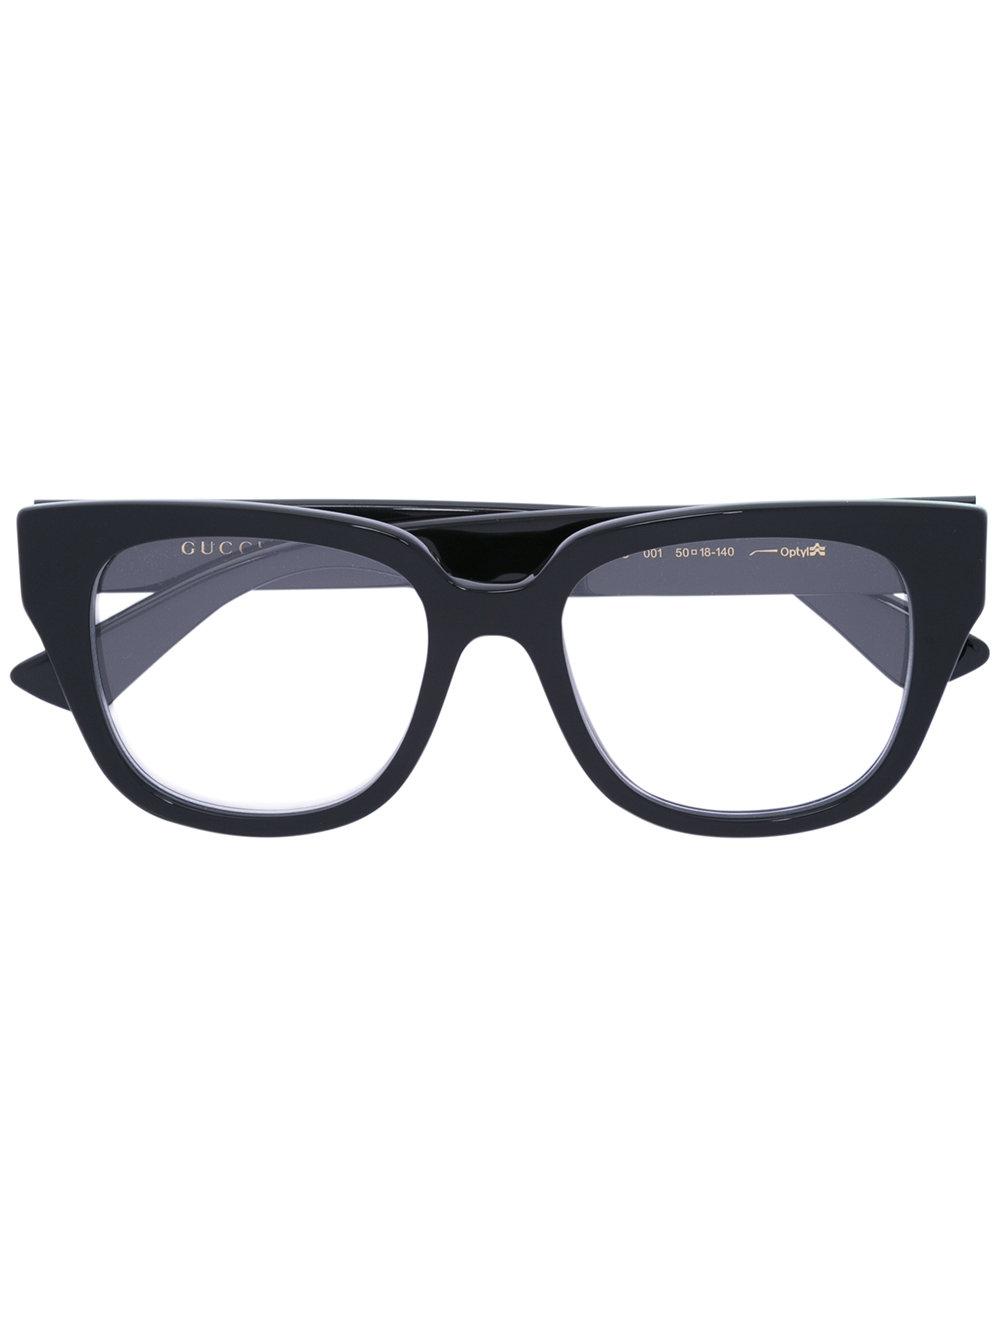 Lyst - Gucci Gg Thick Rimmed Glasses in Black